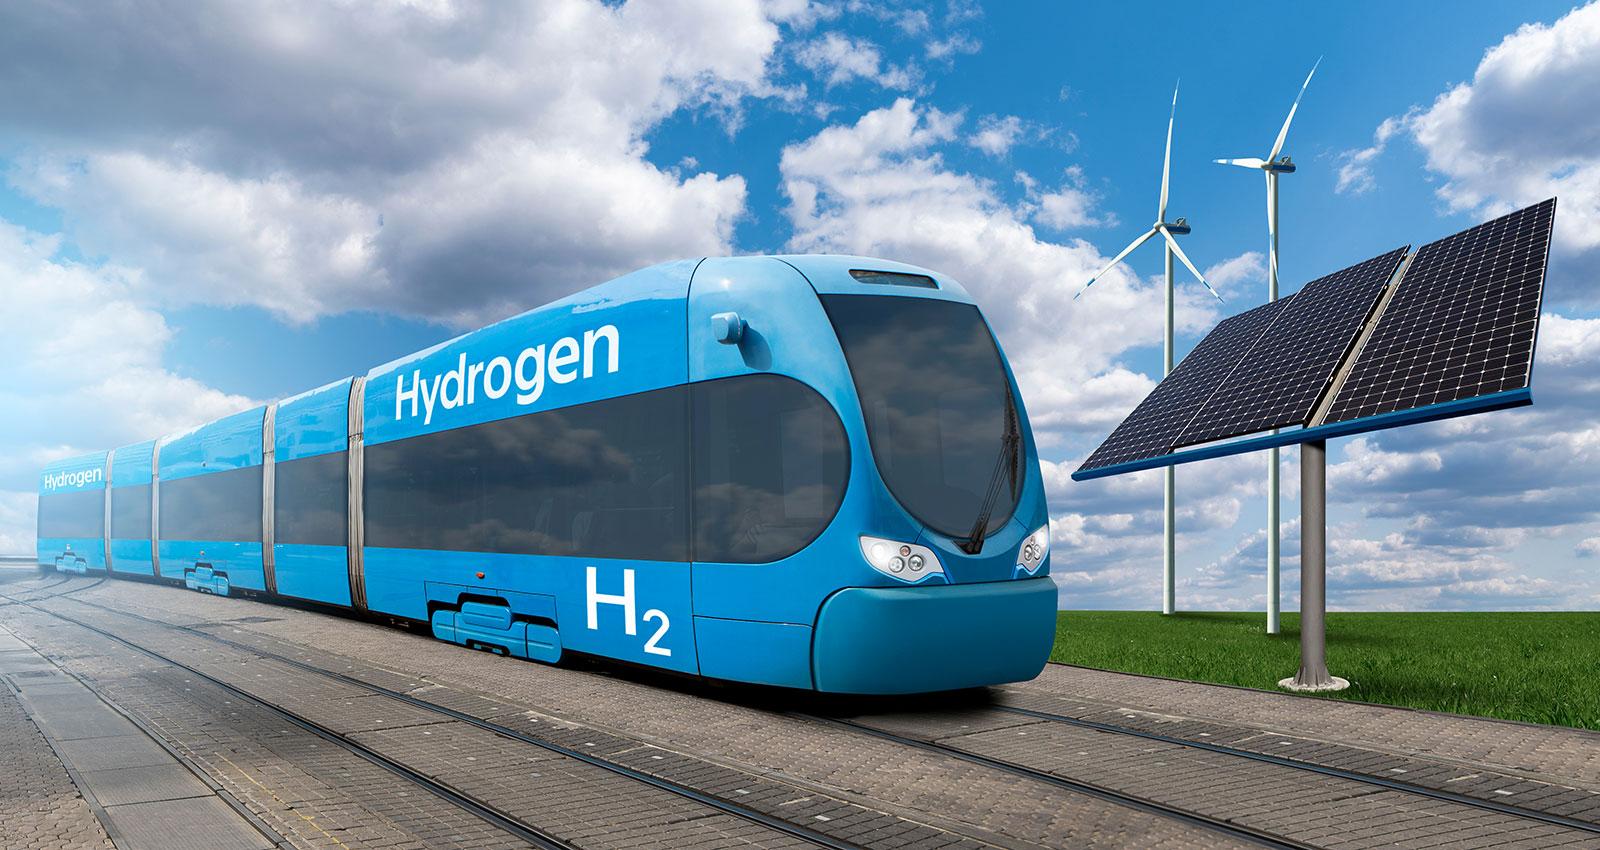 Train powered by hydrogen with wind turbines and solar panels. Getting green hydrogen from renewable energy sources.